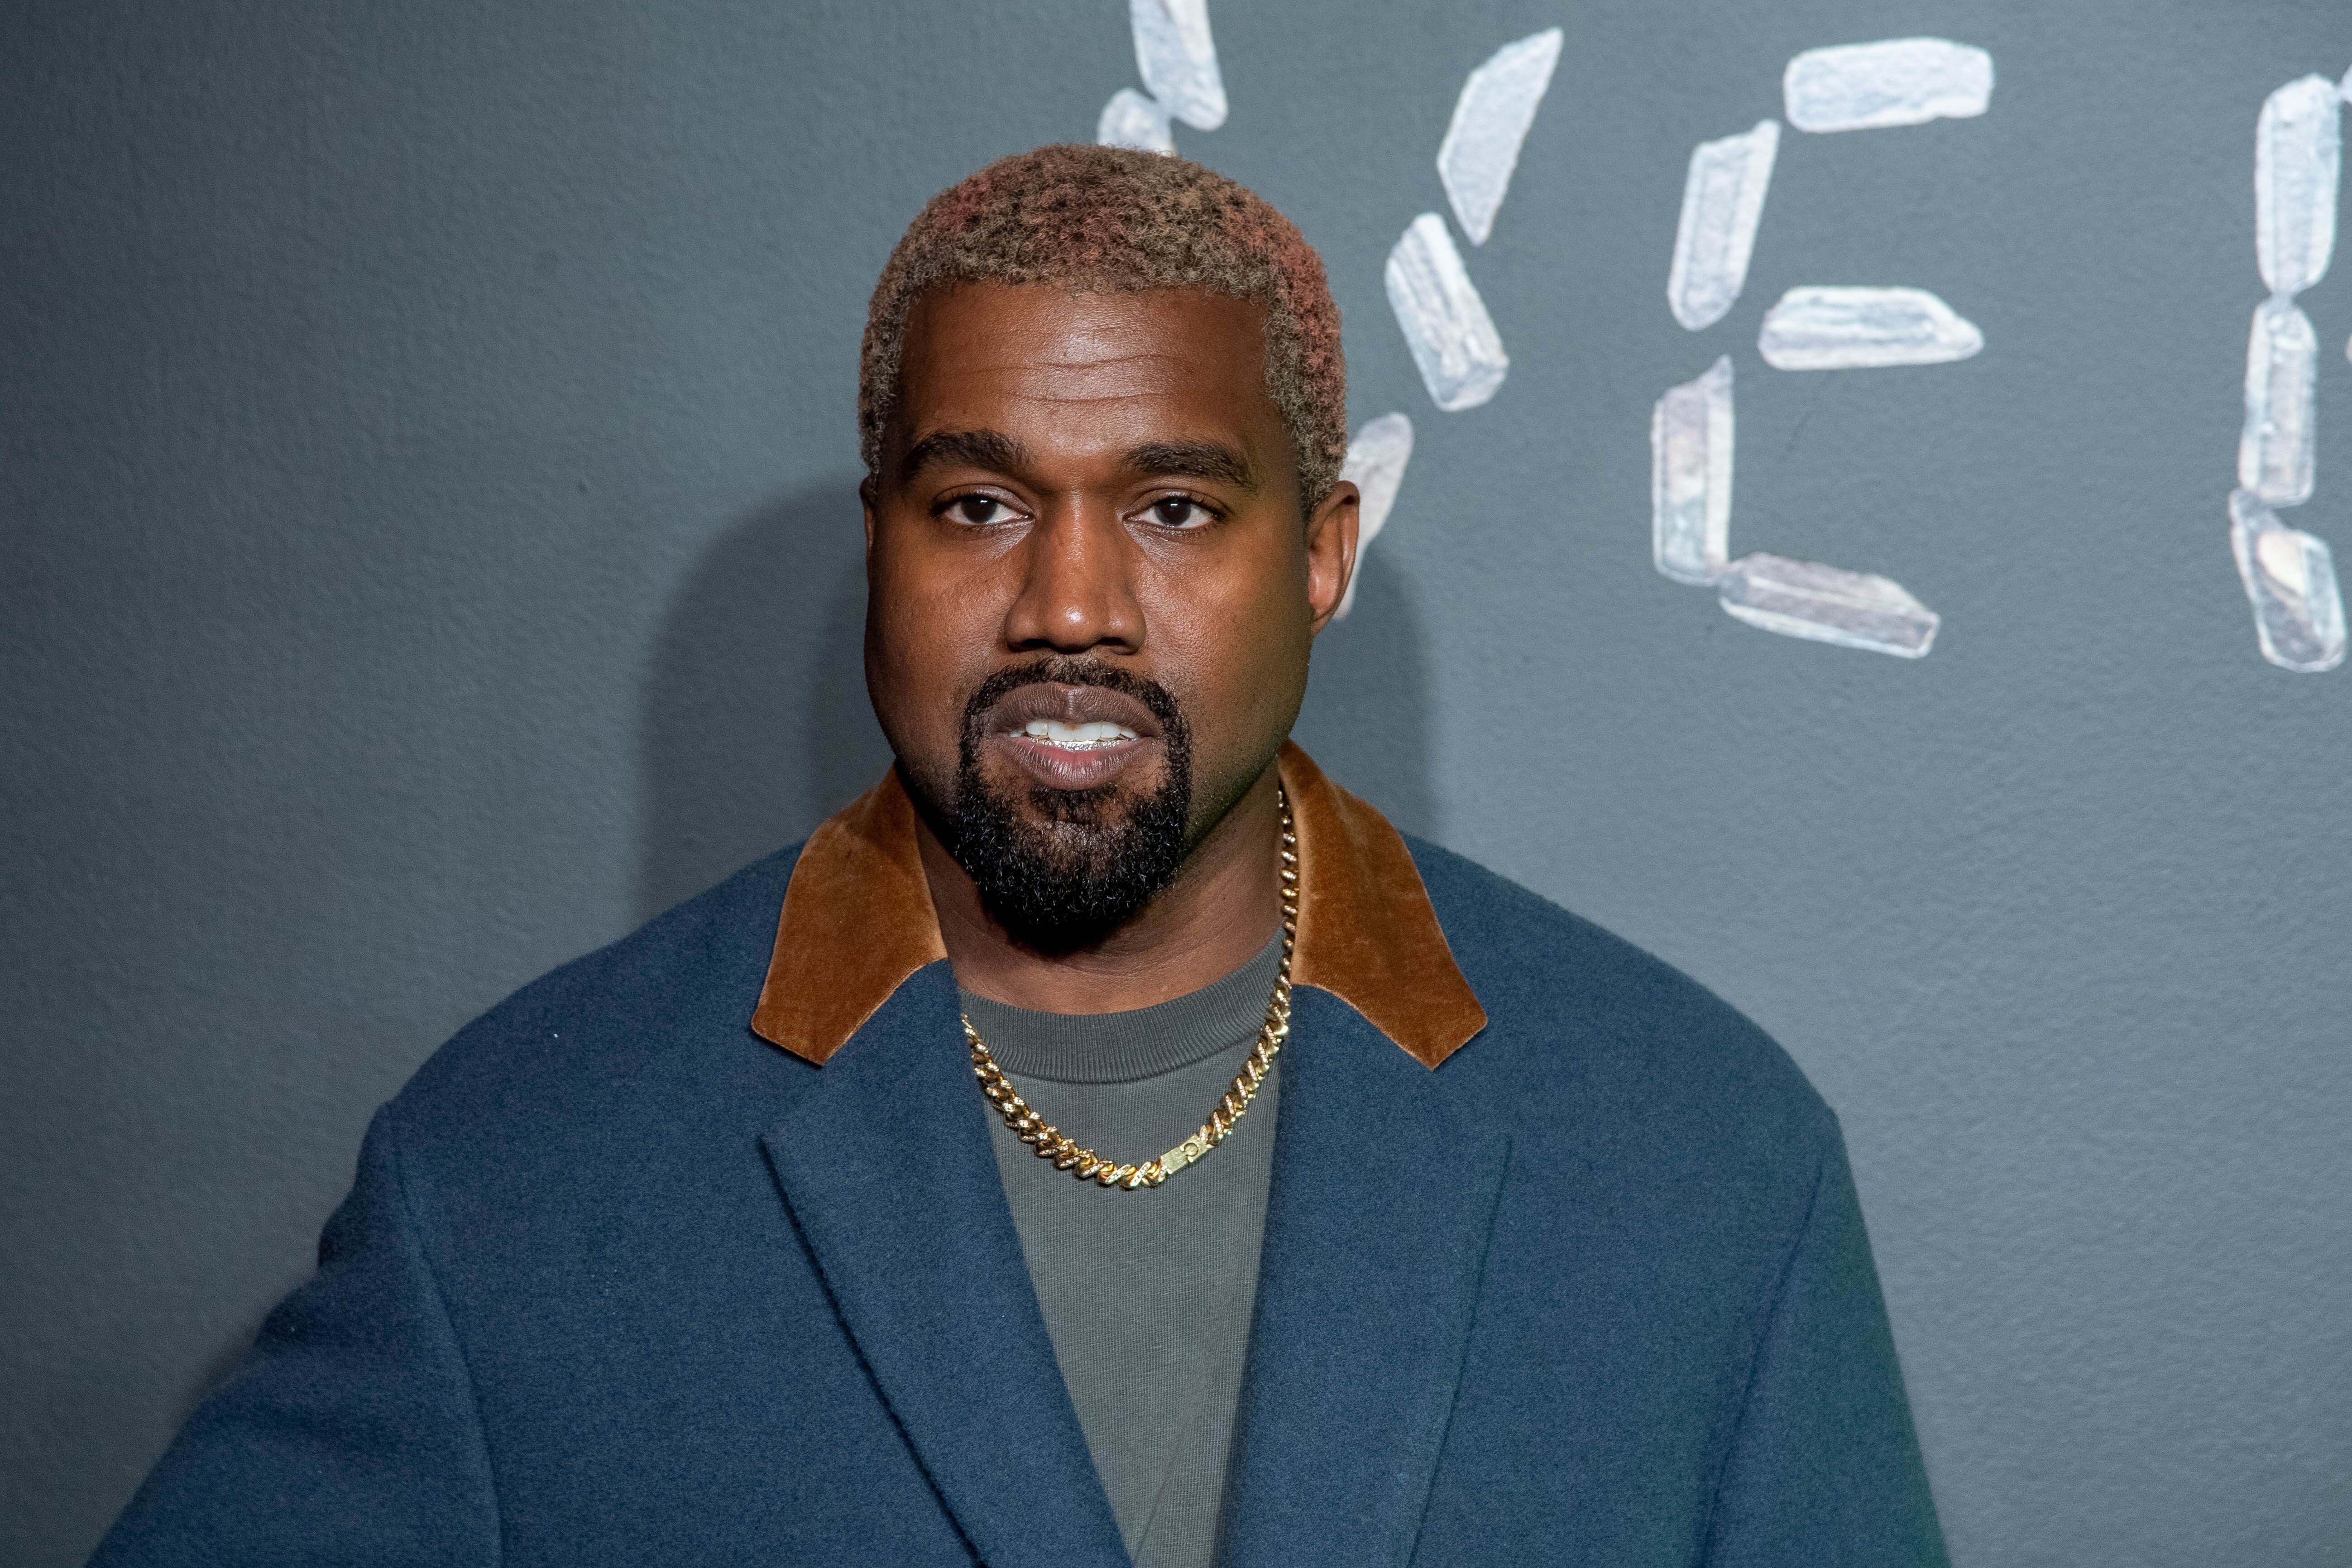 Kanye West at the Versace fall 2019 fashion show in New York/ Source: Getty Images